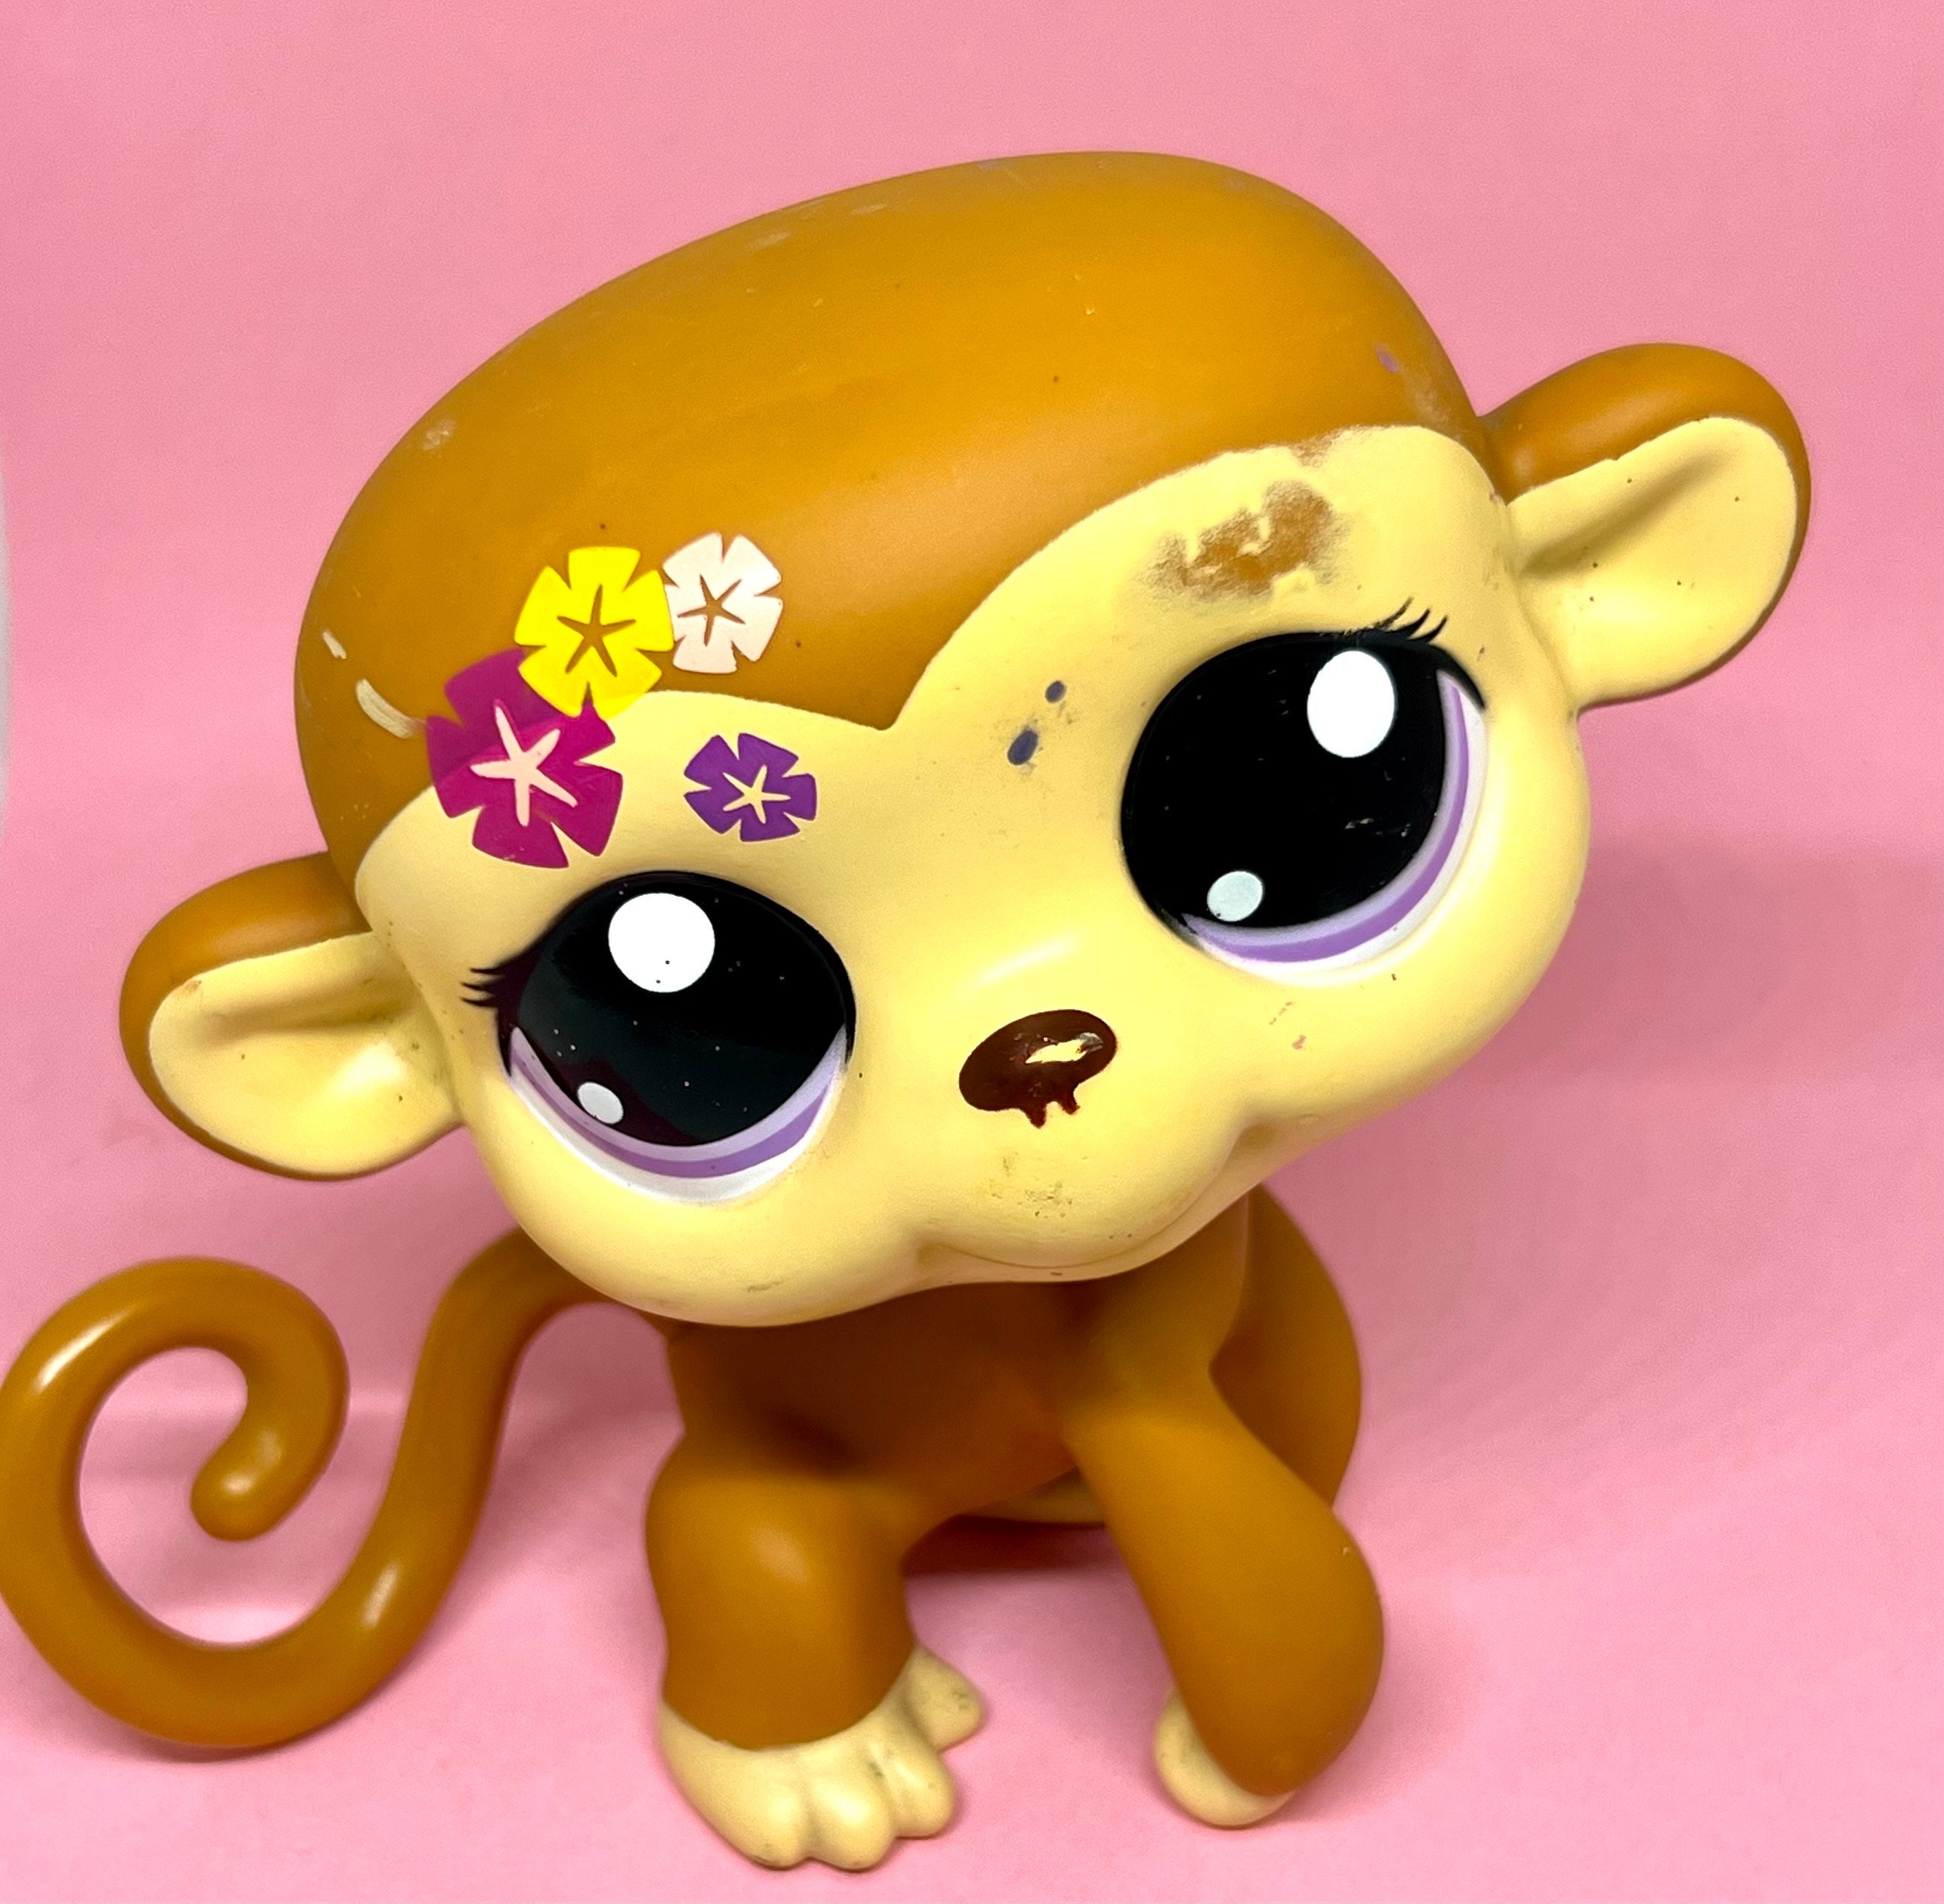 Littlest Pet Shop toys rare LPS toys cute animals toys for girls collection  gift